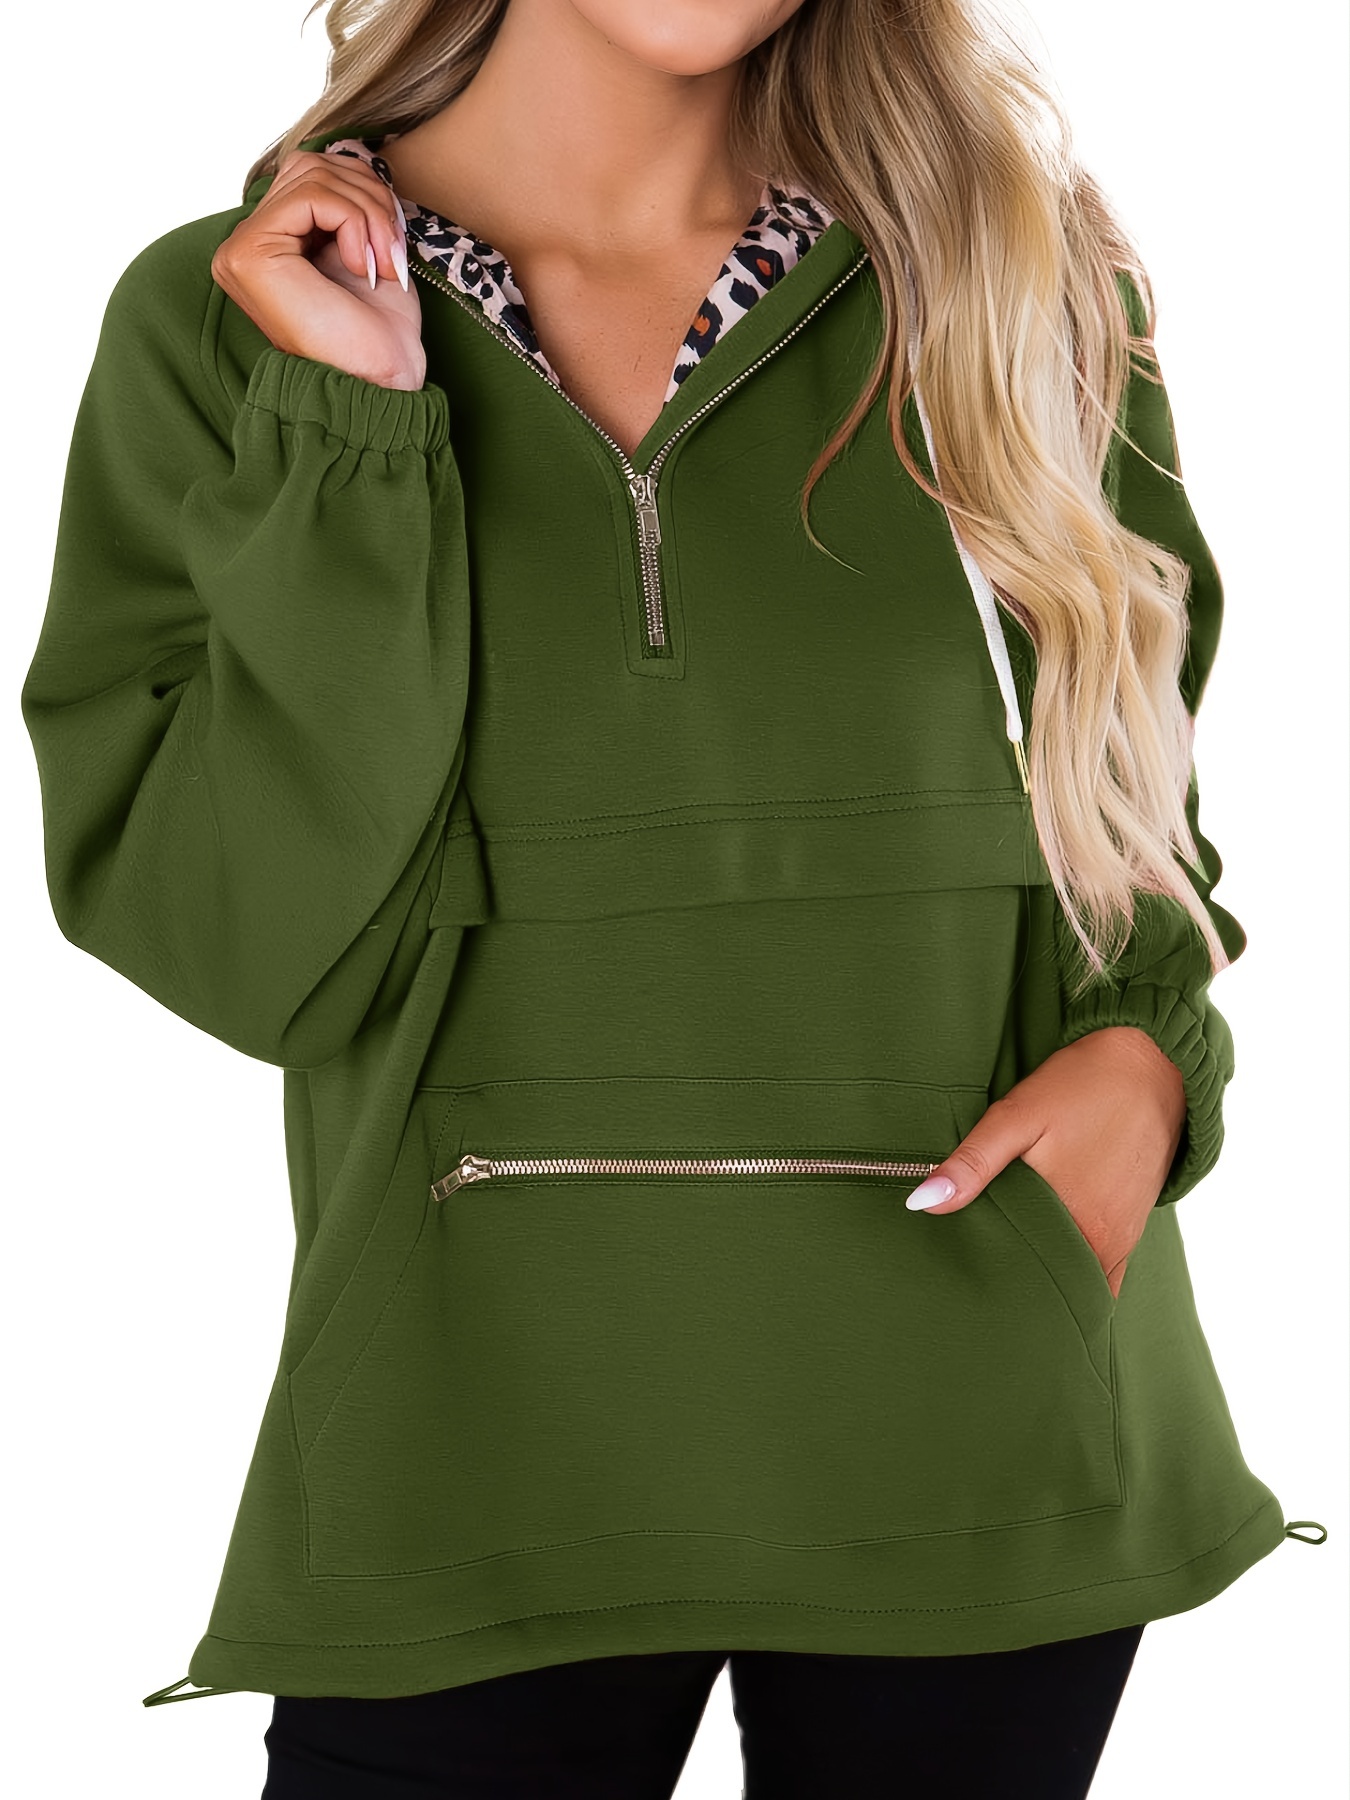  V Neck T Shirts for Women Printed Hooded Pocket Sweater Ruffle  Sleeve Tops for Women Funny Hoodies Emo Shirt one Cent 1 Cent Stuff Coupons  and Promo Codes Beige : Clothing